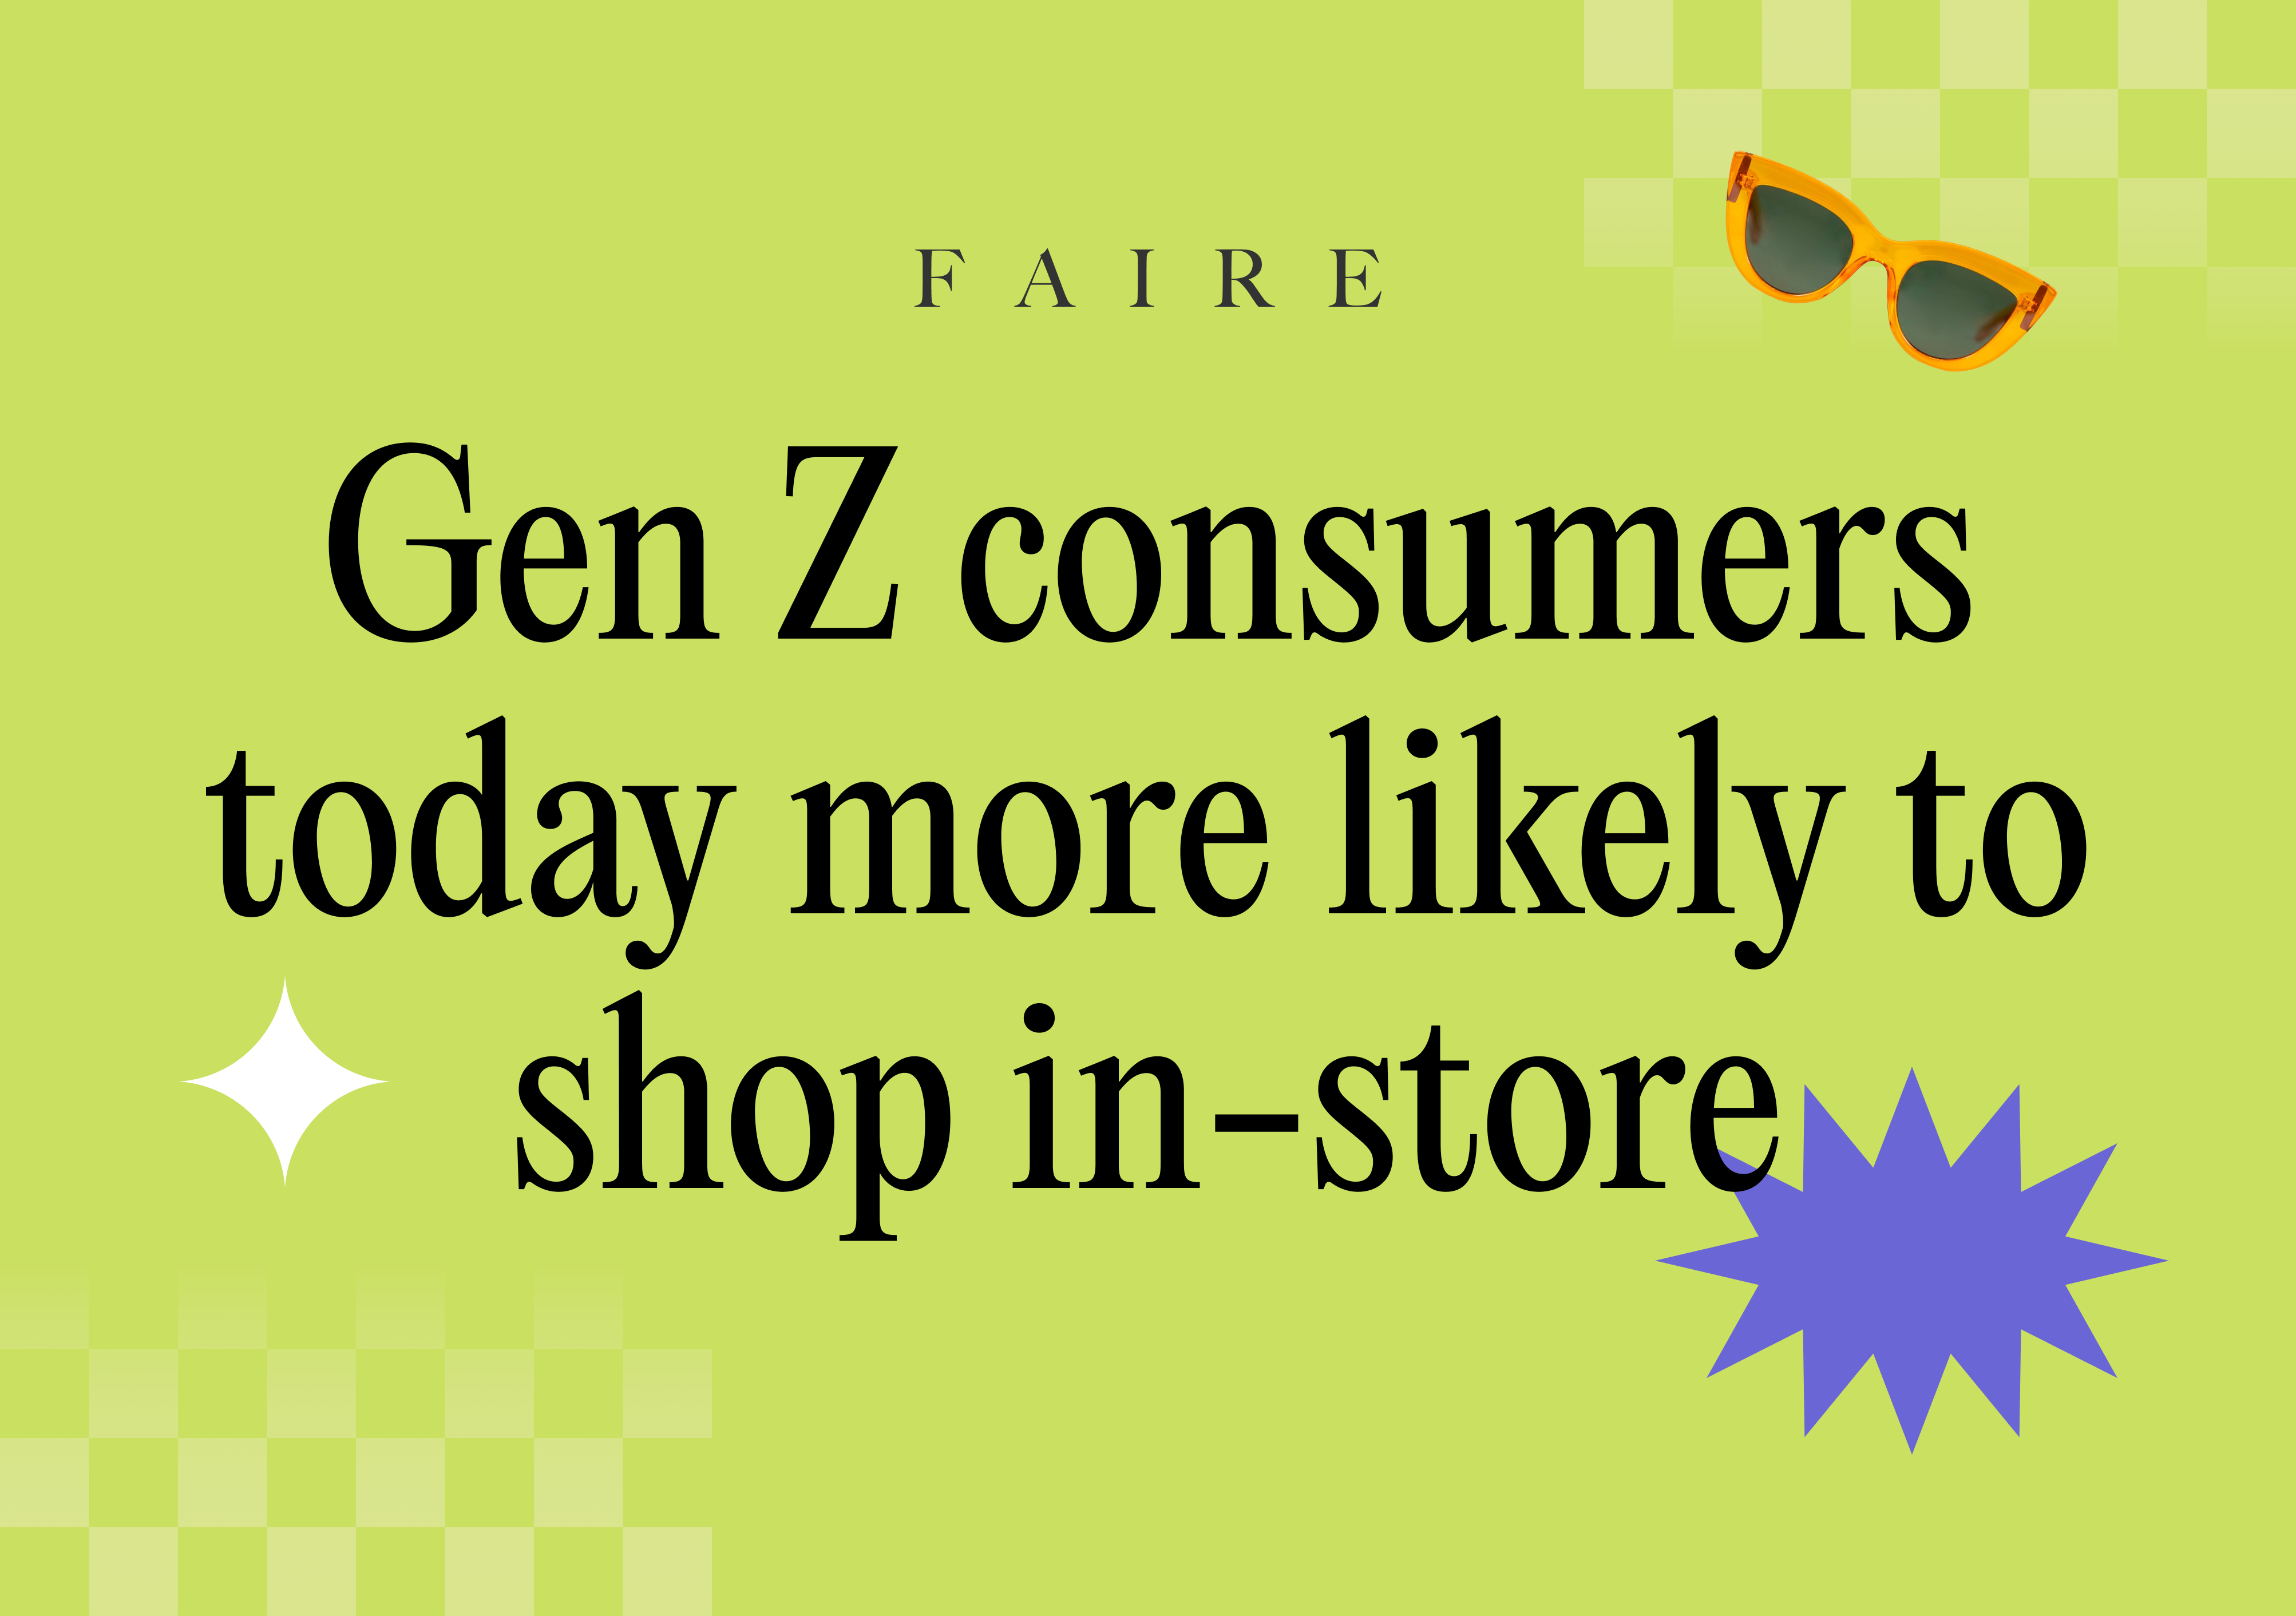 Faire Launches in the UK to Power the Growth of Independent Retailers -  Faire Newsroom